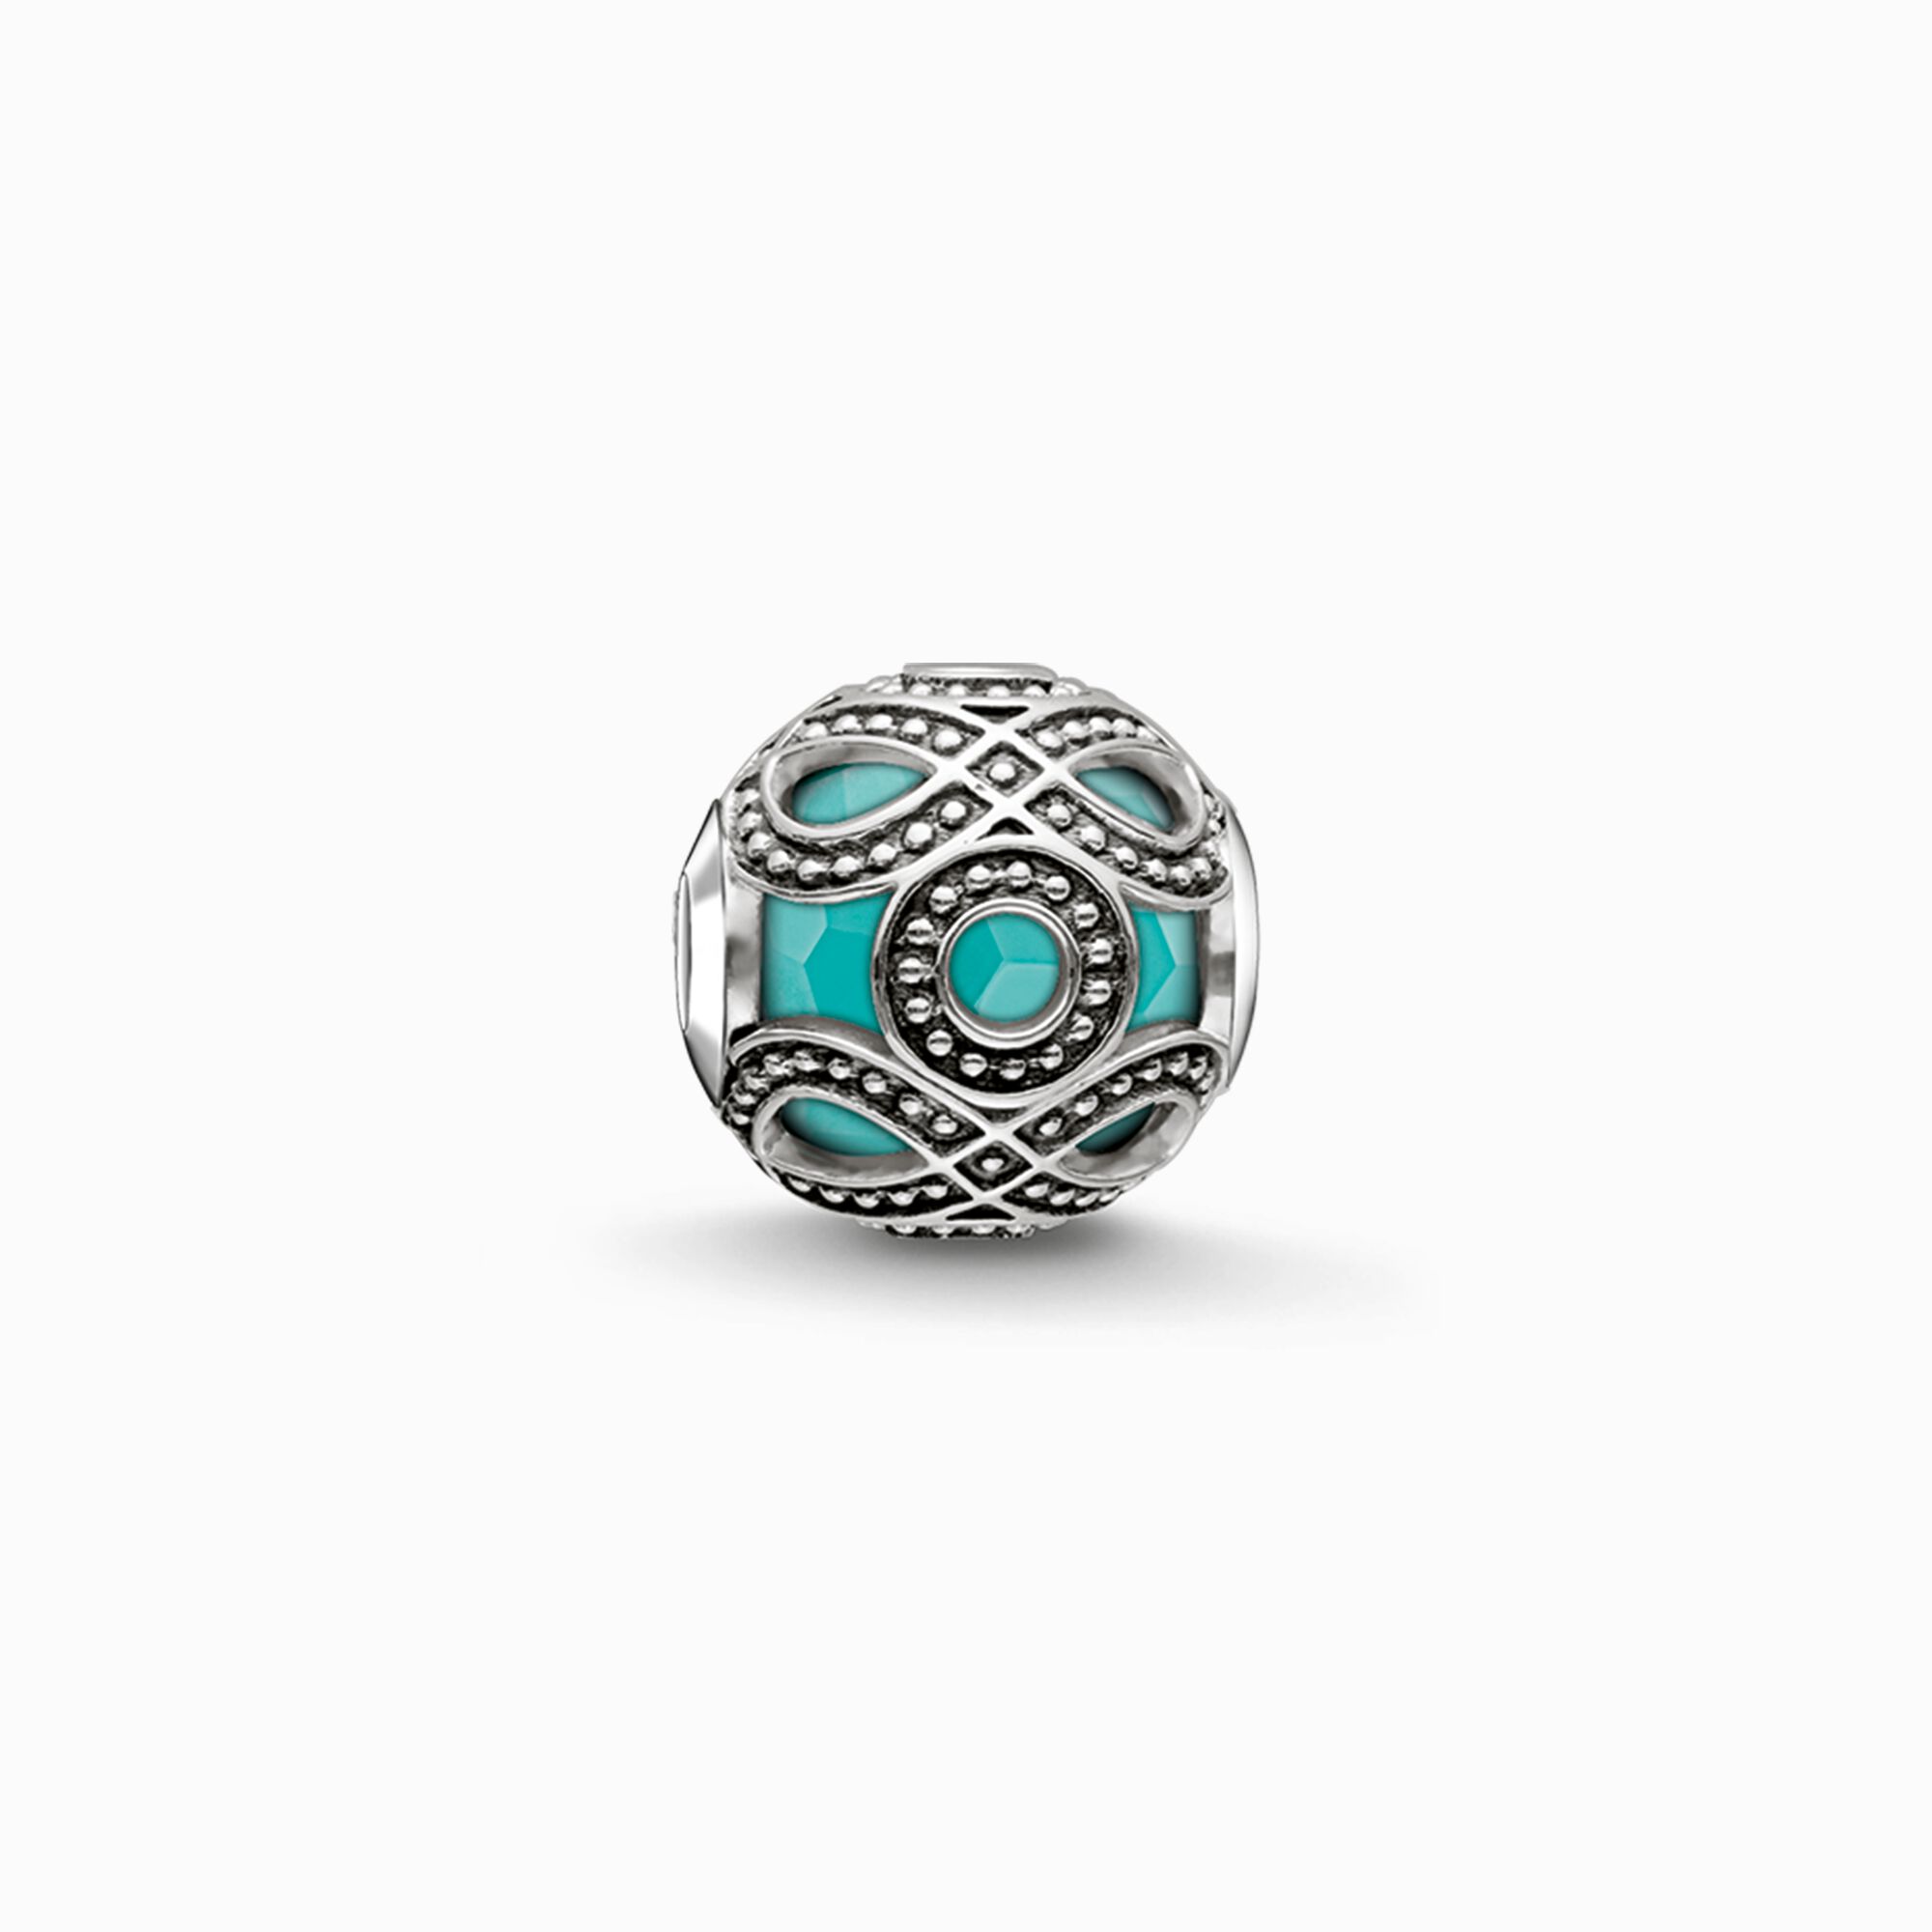 Bead turquoise ethnic from the Karma Beads collection in the THOMAS SABO online store